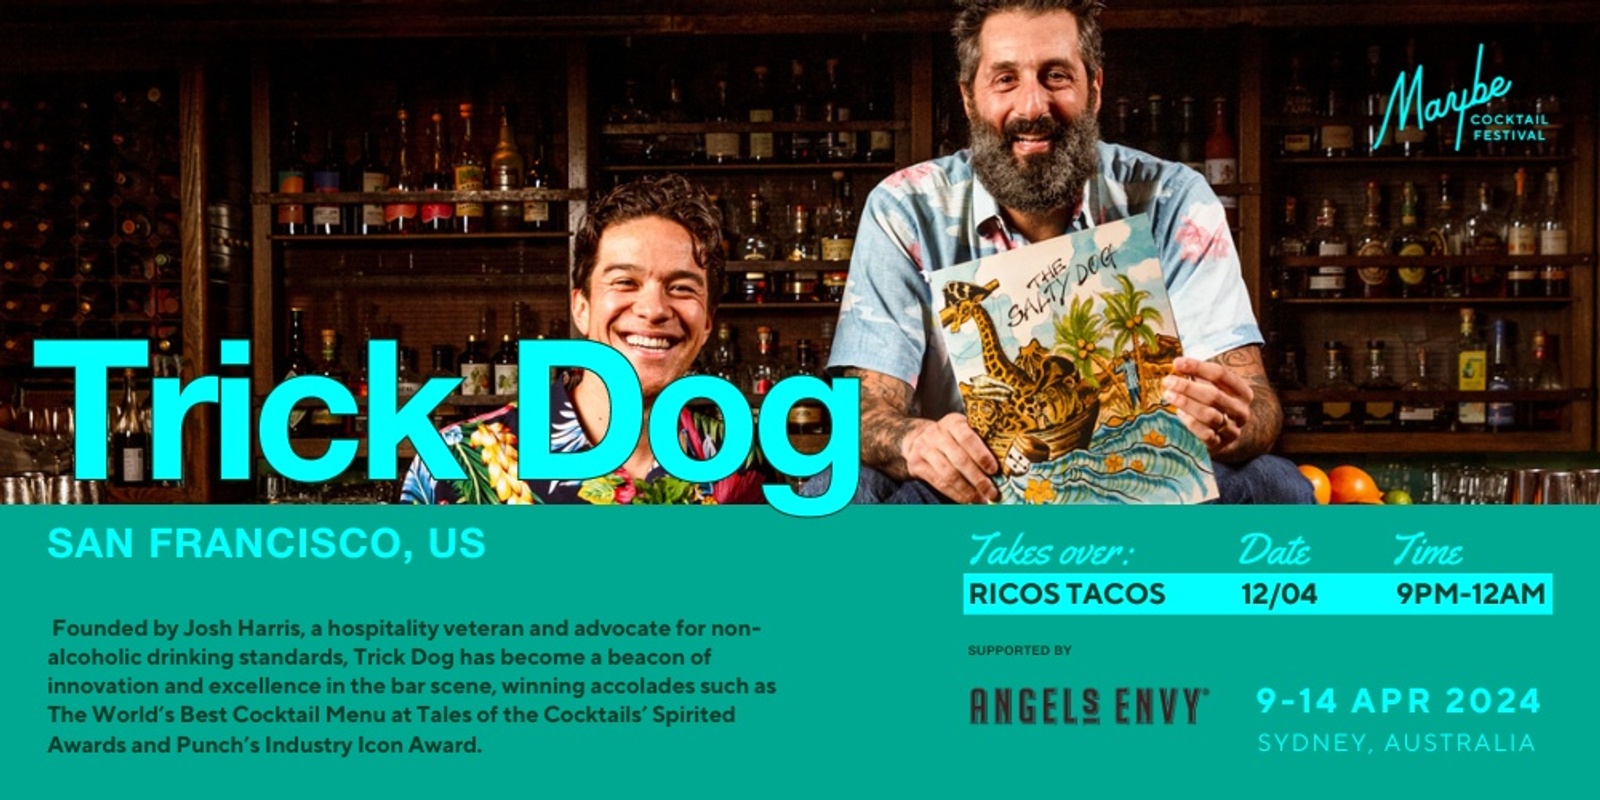 Banner image for Maybe Cocktail Festival: Trick Dog Takes Over Ricos Tacos